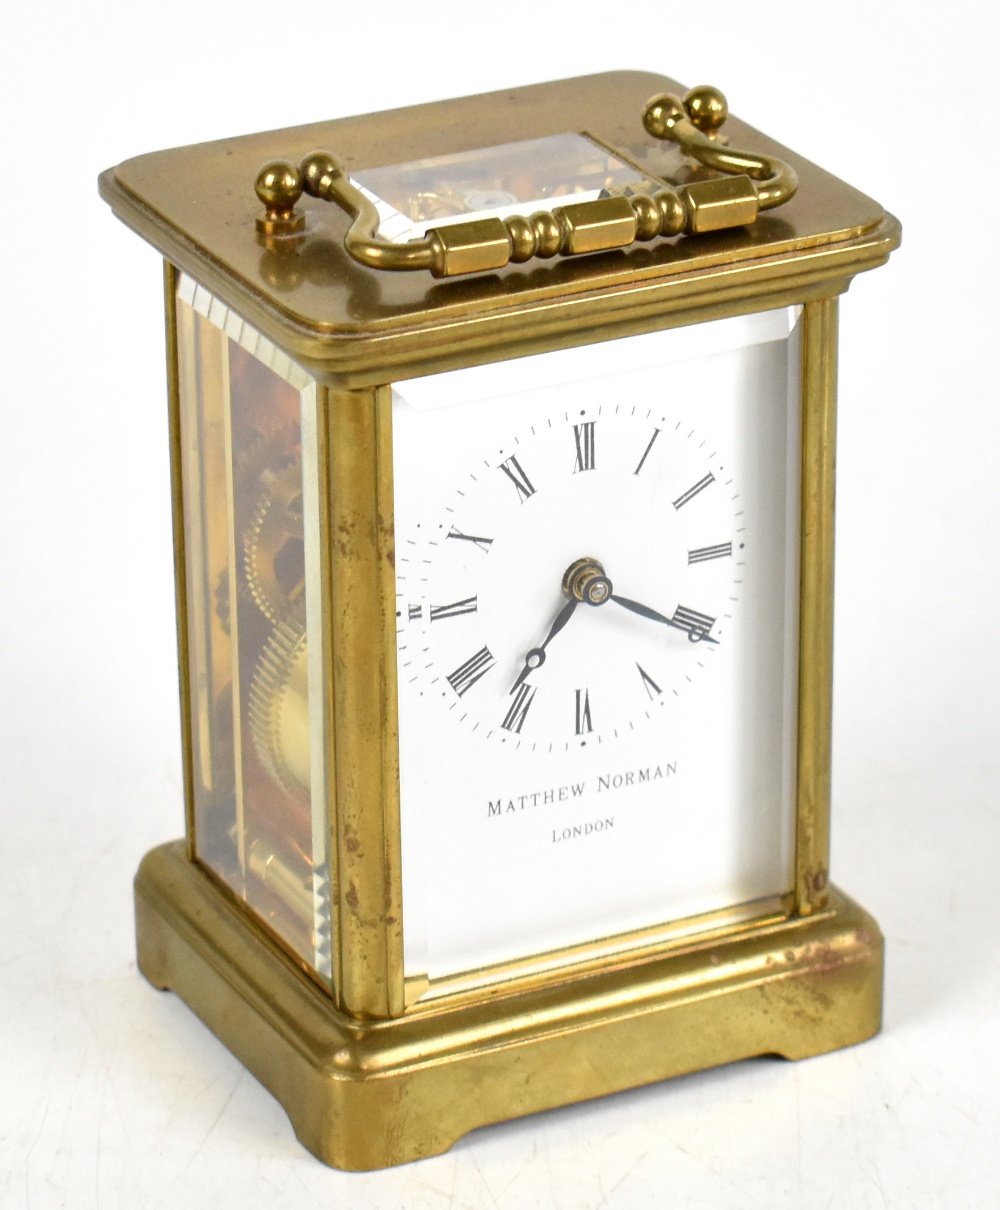 MATTHEW NORMAN; a modern lacquered brass carriage time piece, the enamel dial with Roman numerals,